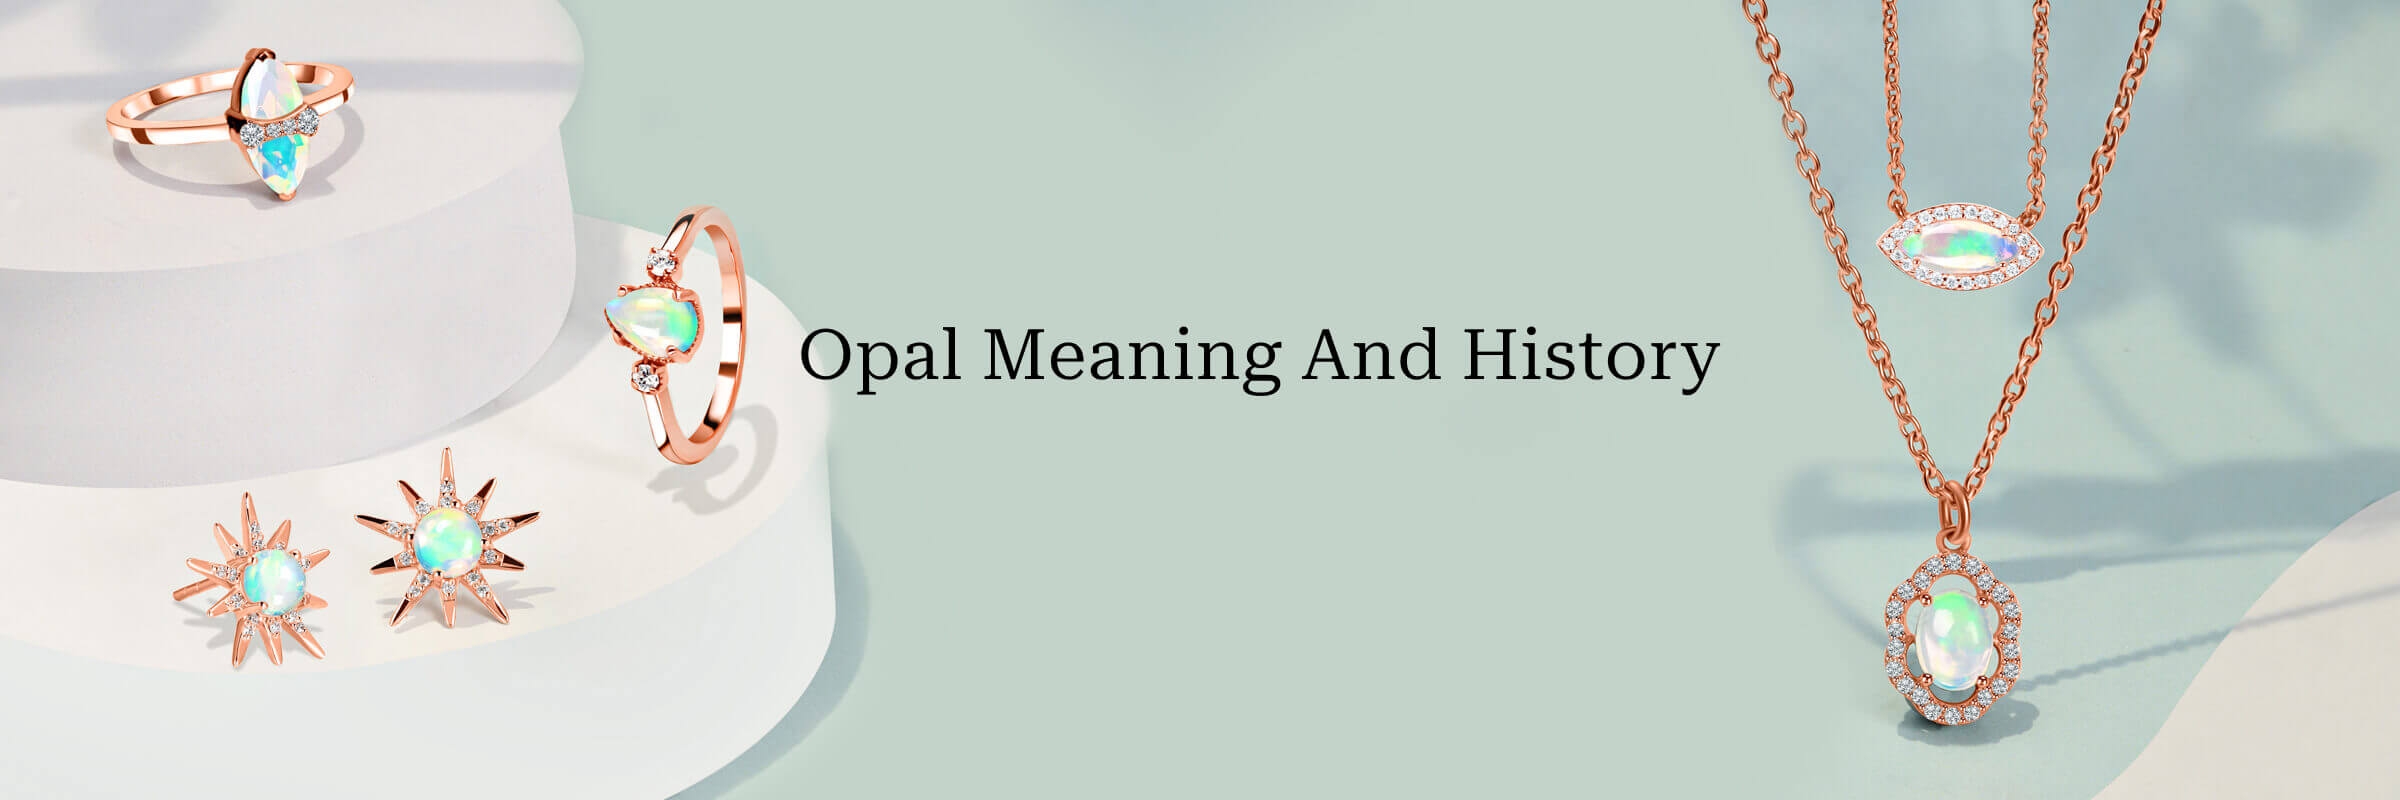 Opal meanings, history, facts & tips